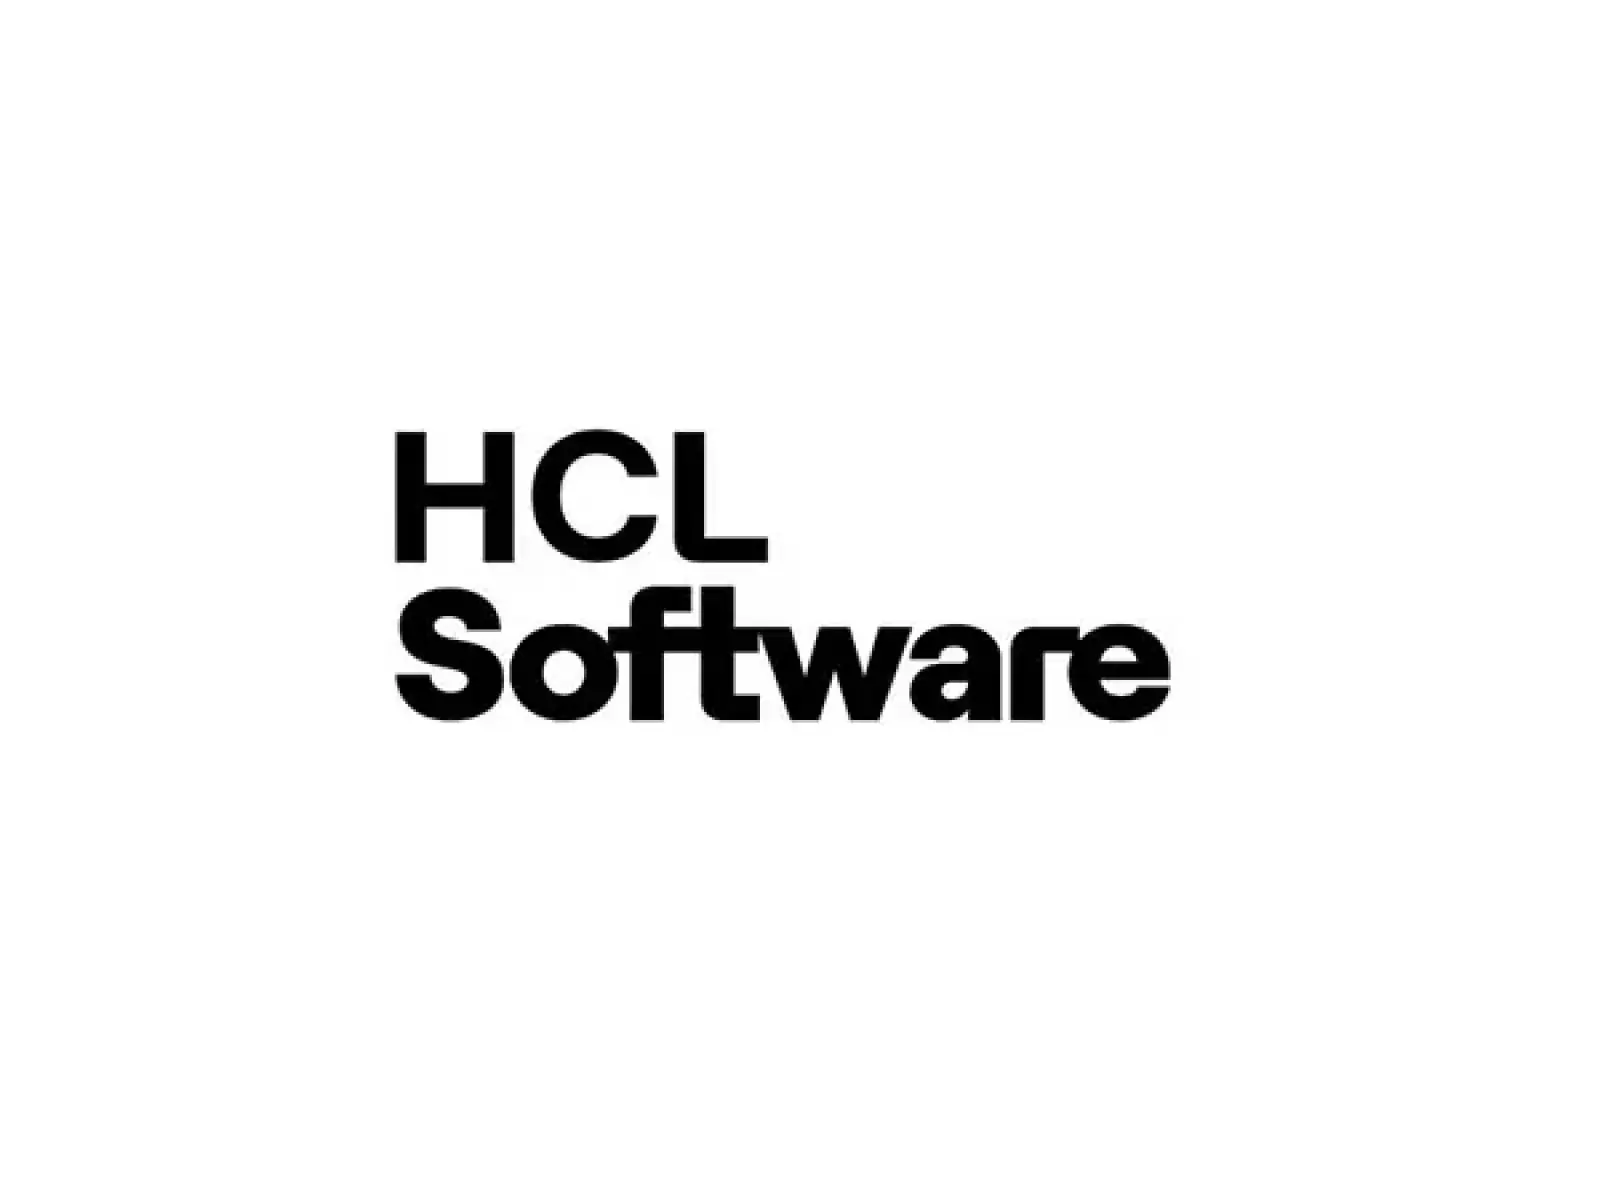 HCL Software Ascends to Top Spot in Indian Software Market, Aims to Power India's Digital Transformation